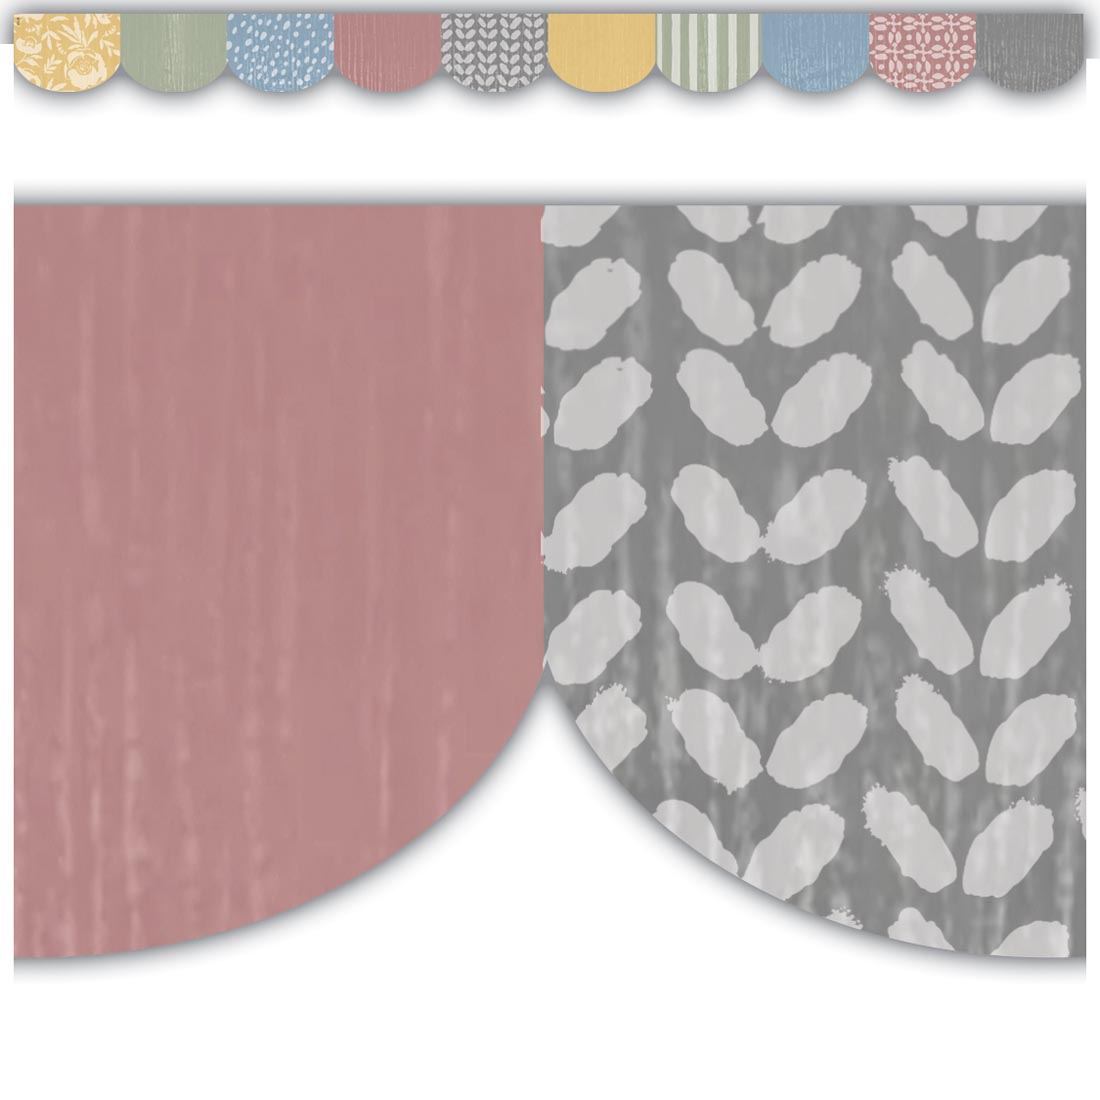 closeup plus a complete strip of Scalloped Die-Cut Border Trim from the Classroom Cottage collection by Teacher Created Resources